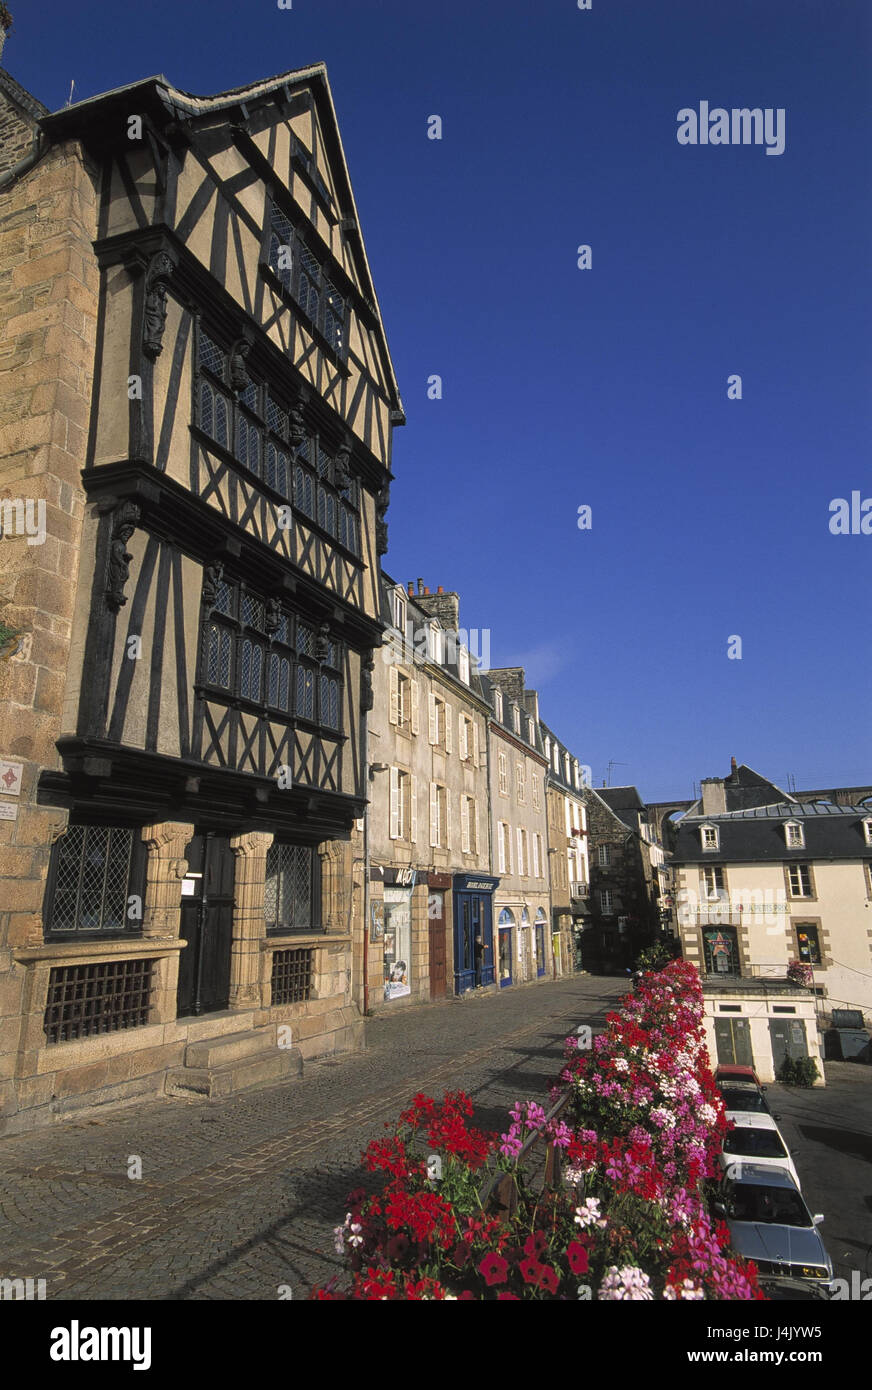 France, Brittany, Morlaix, Place Allende, Maison de la pure Anne, 16 cent., detail Europe, department Finistere, houses, residential houses, Rue you the Mur 33, house of the duchess Anne, architectural style, architecture, lantern house, culture, place of interest, outside Stock Photo